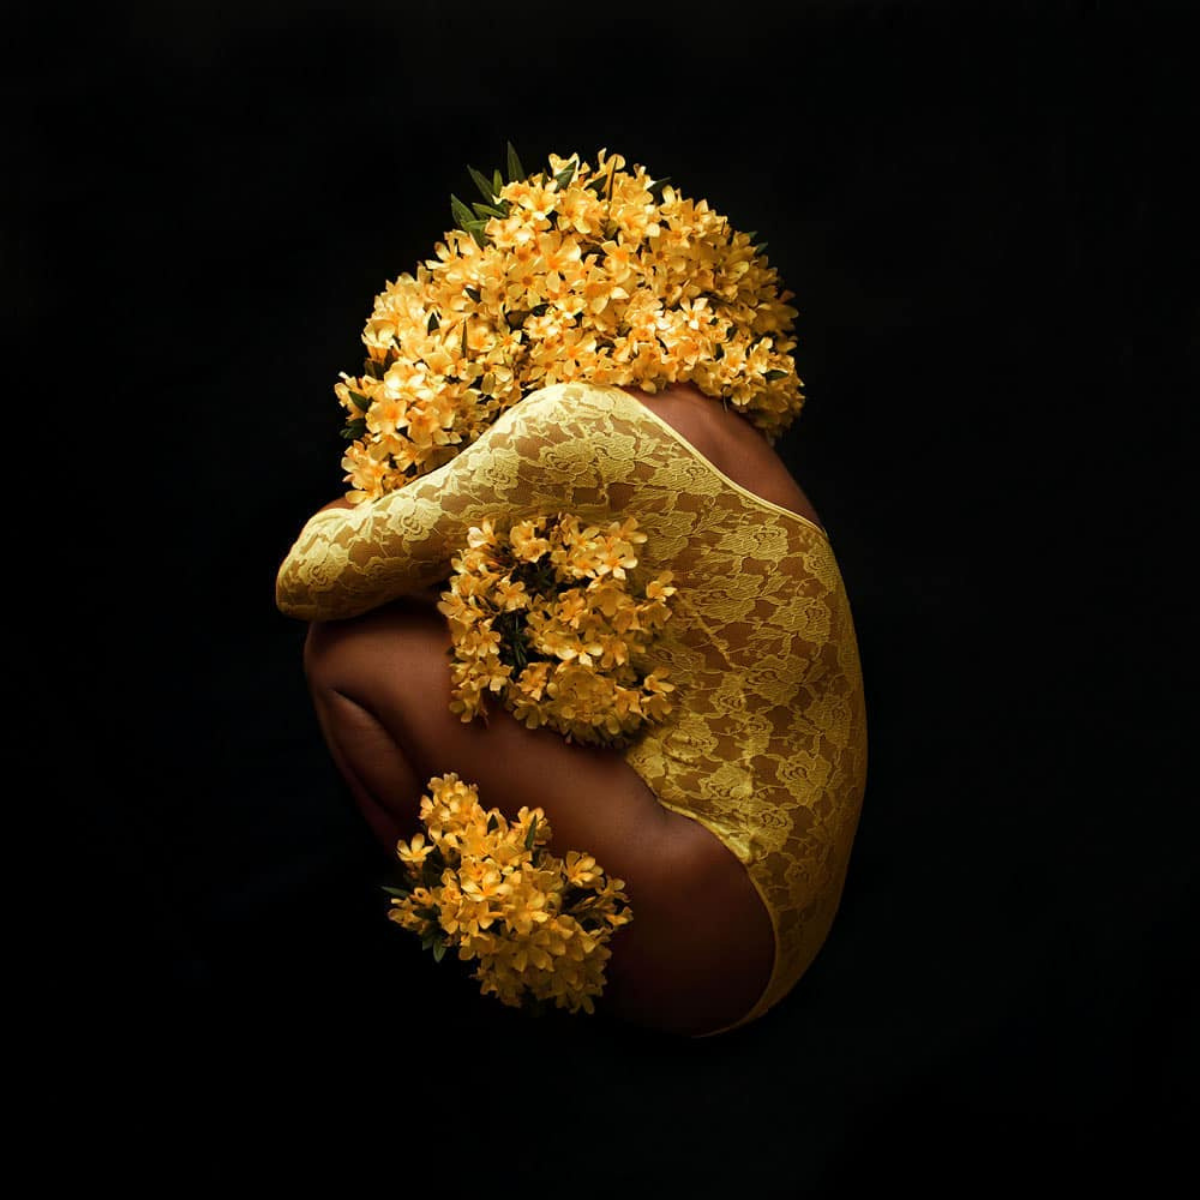 fares-micues-glorious-botanical-self-portraits-featured